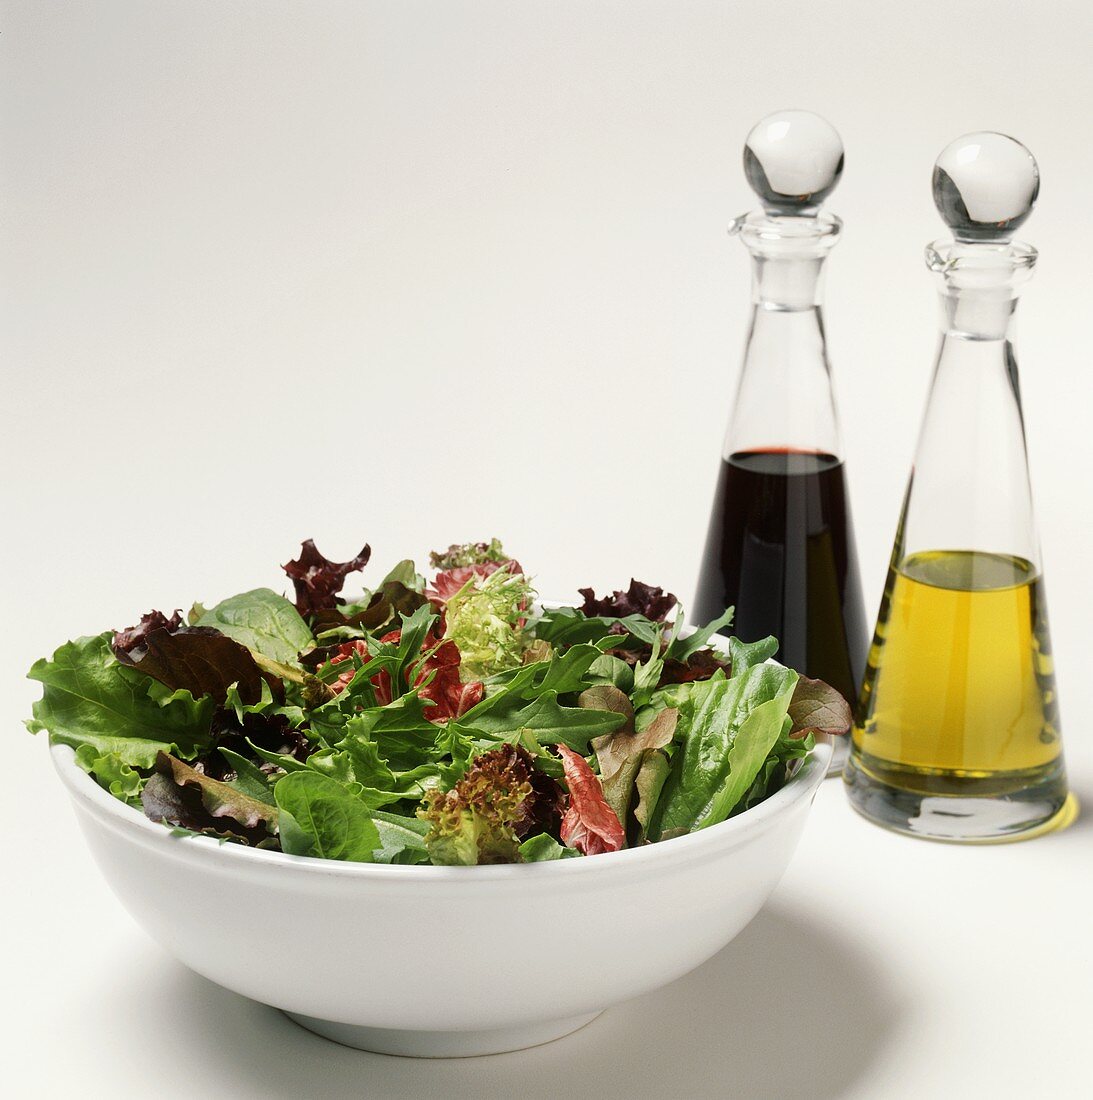 Mixed Green Salad with Bottles of Oil and Vinegar